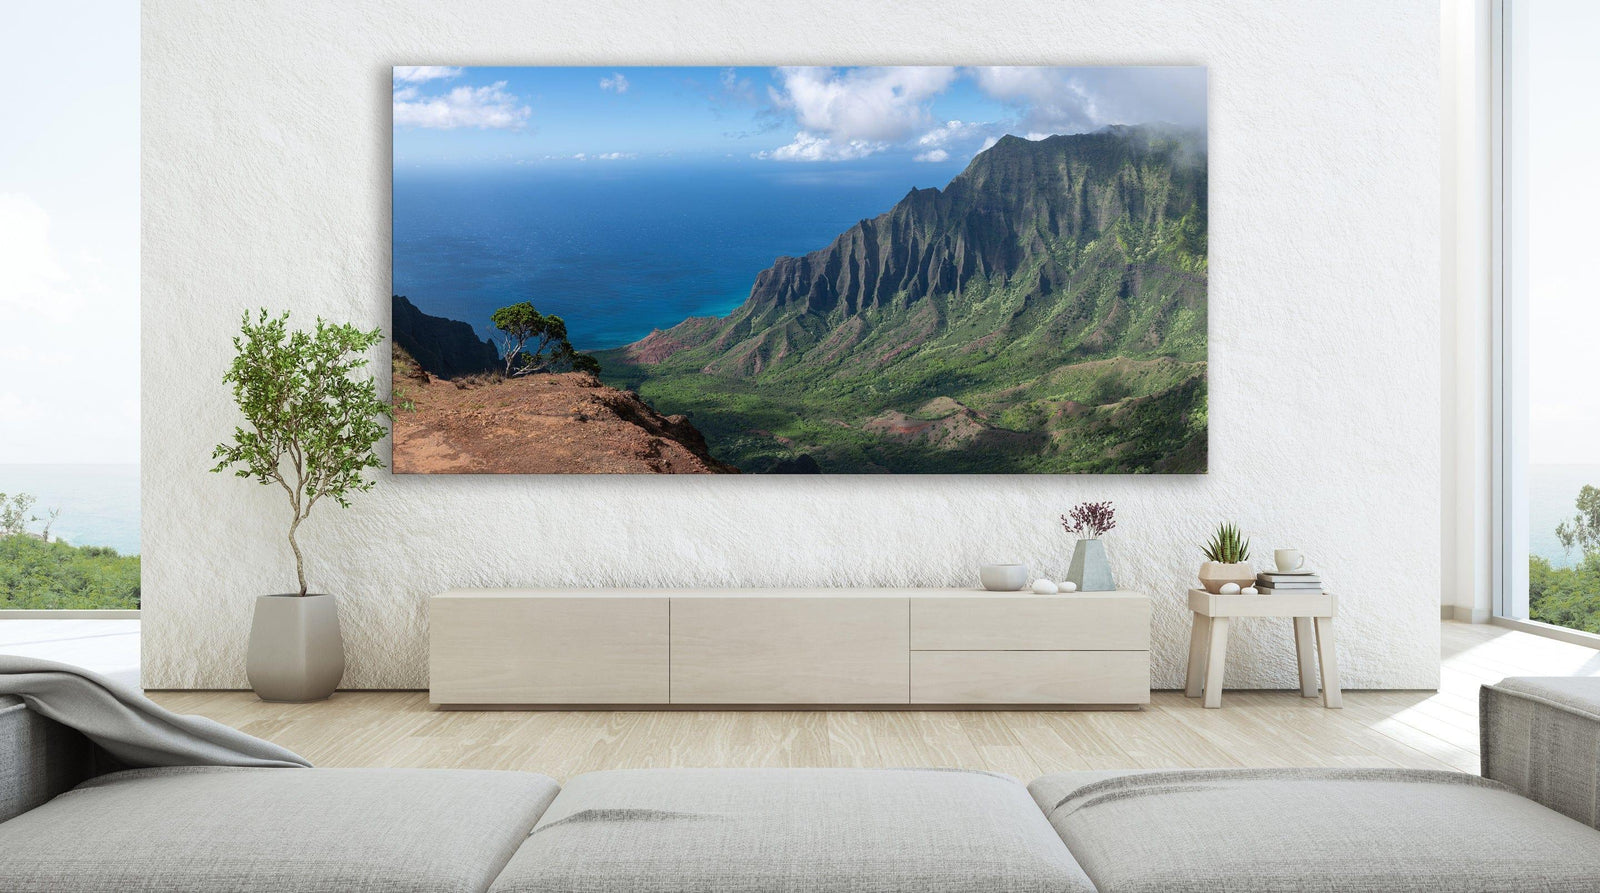 Edge of Awe | Kalalau Valley Cliffside - Living Moments Media - 3500-5500, 800-3500, Acrylic, Artwork, Best Moments, Best Sellers, black, blue, Canvas, clouds, Coast, forest, green, Hawaii, horizontal, Island, Jungle, Kauai, Metal, Moody, Mountains, Na Pali Coast, new arrivals, New Moments, ocean, open-edition, orange, over-5500, panoramic, pathway, Prints, rocks, sand, size-20-x-40, size-40-x-80, Surf, trail, Trees, Visual Artwork, Water, Waterfalls, waves, White